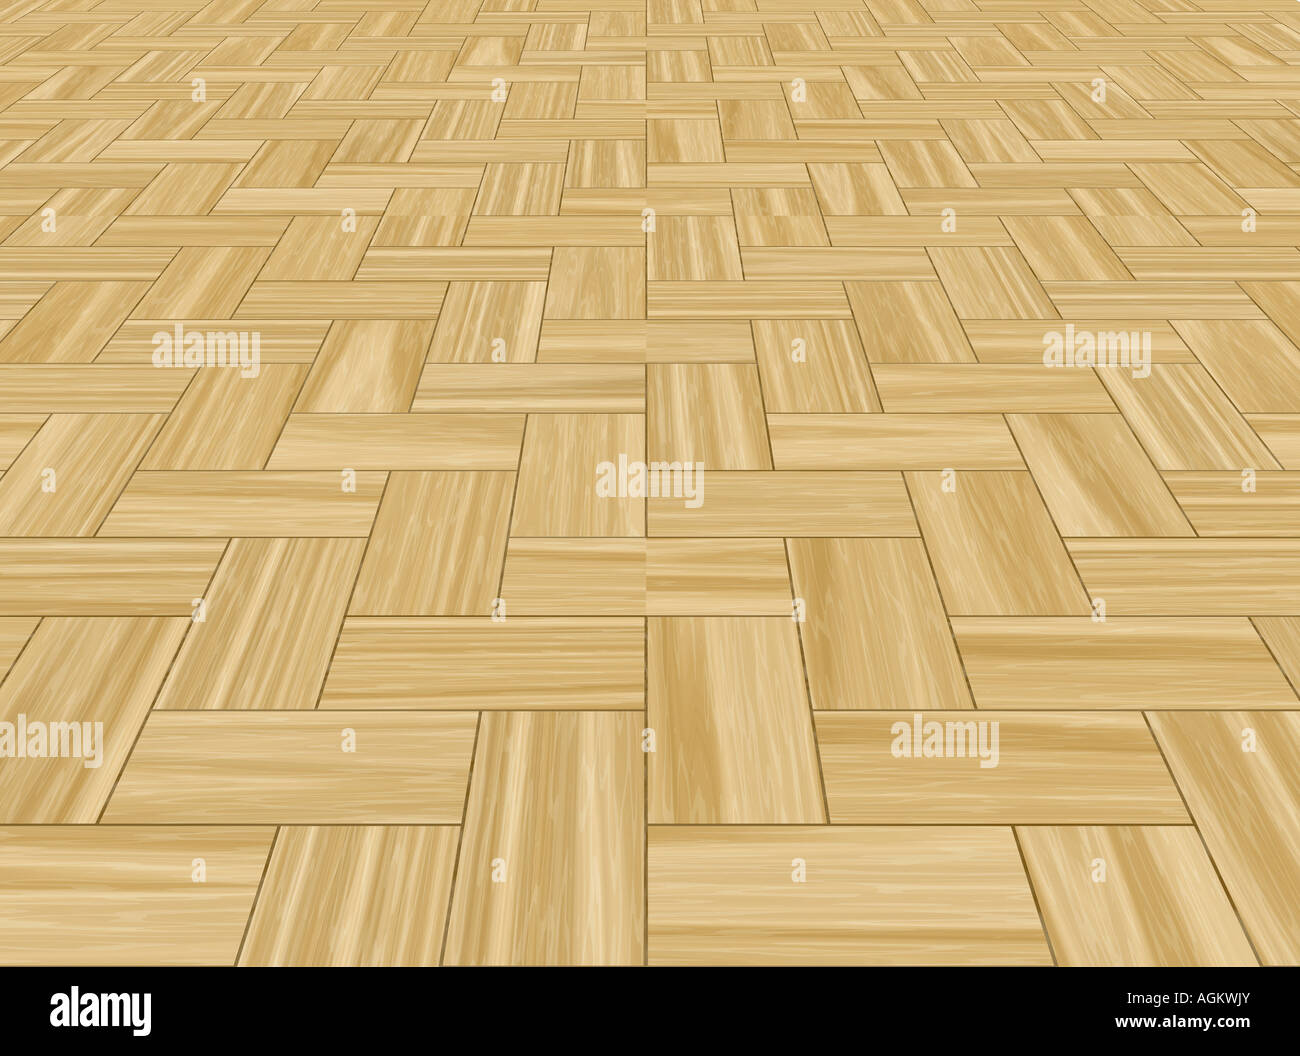 a large background image of parquetry floor Stock Photo